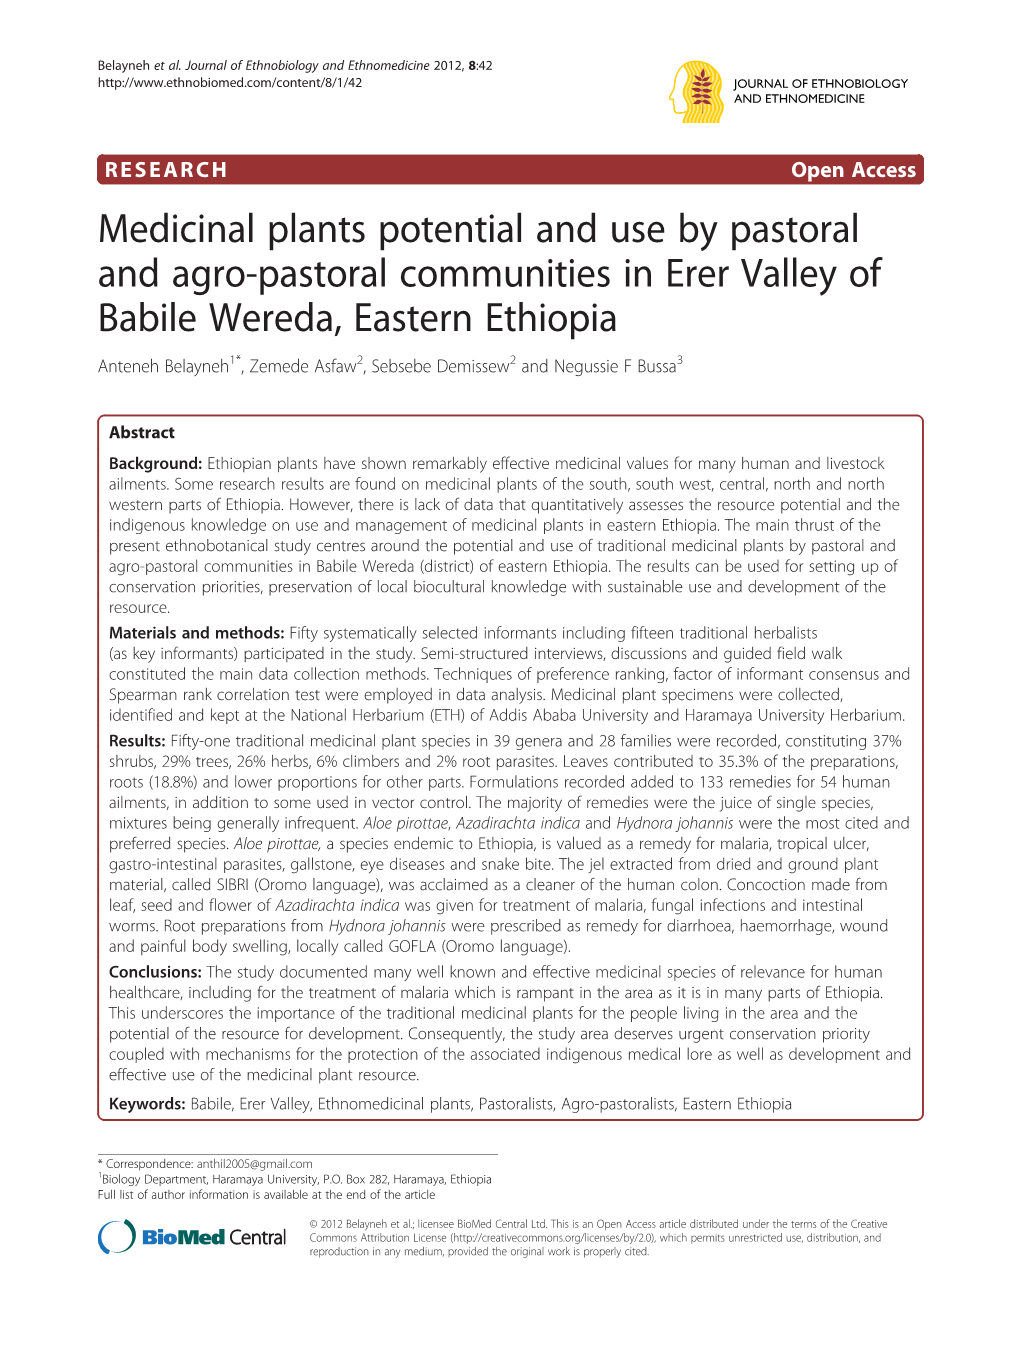 Medicinal Plants Potential and Use by Pastoral and Agro-Pastoral